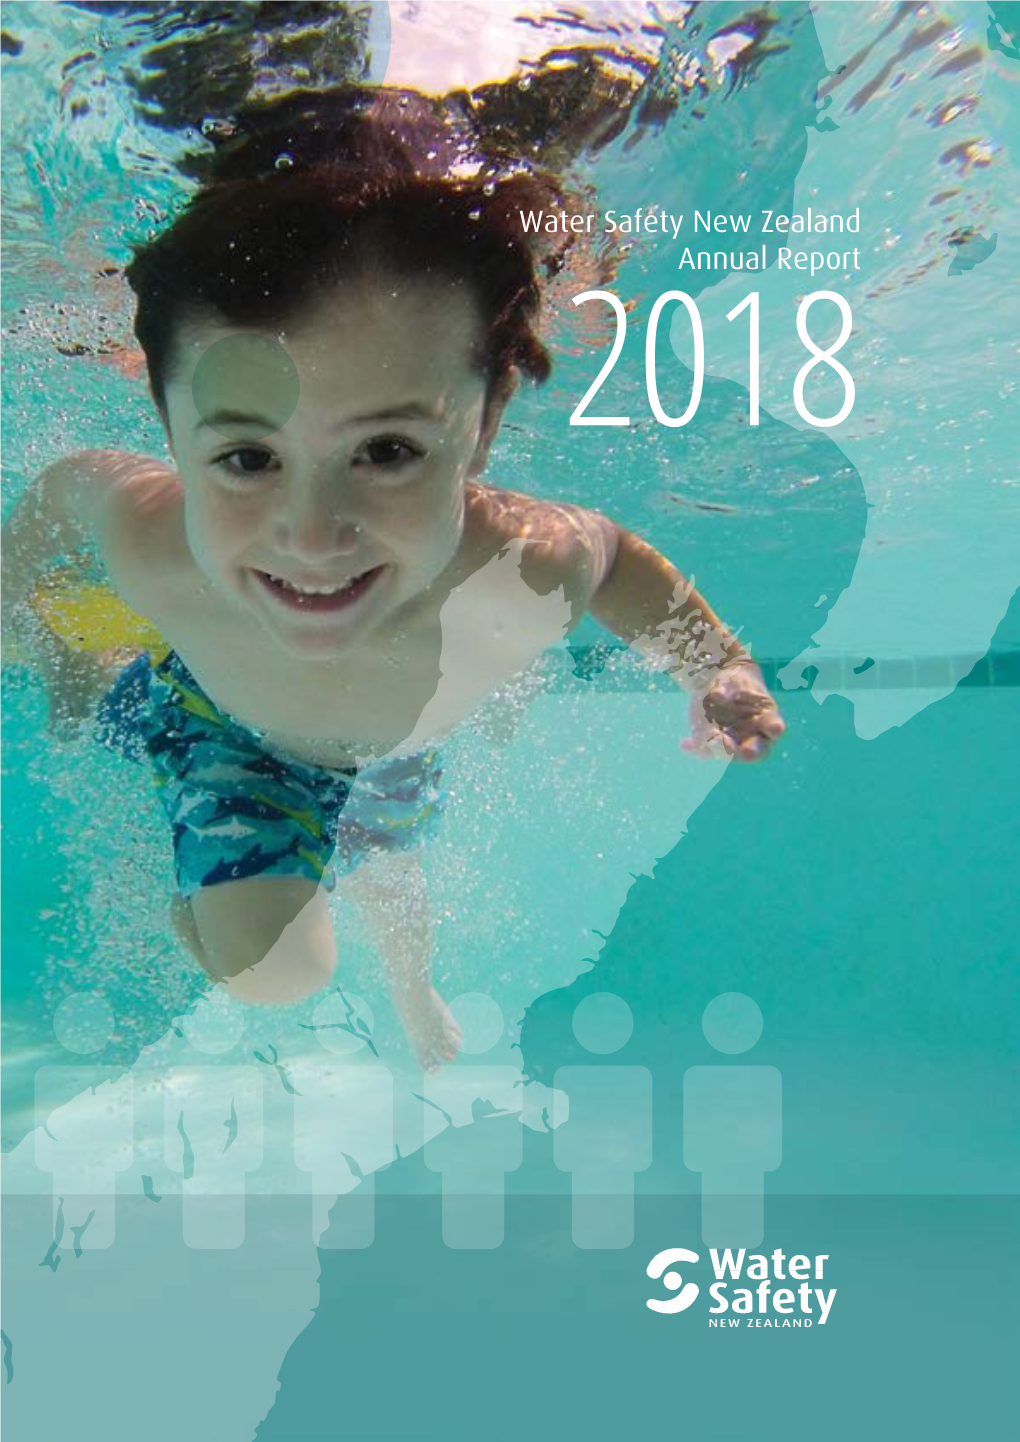 Water Safety New Zealand Annual Report 2018 Achievements